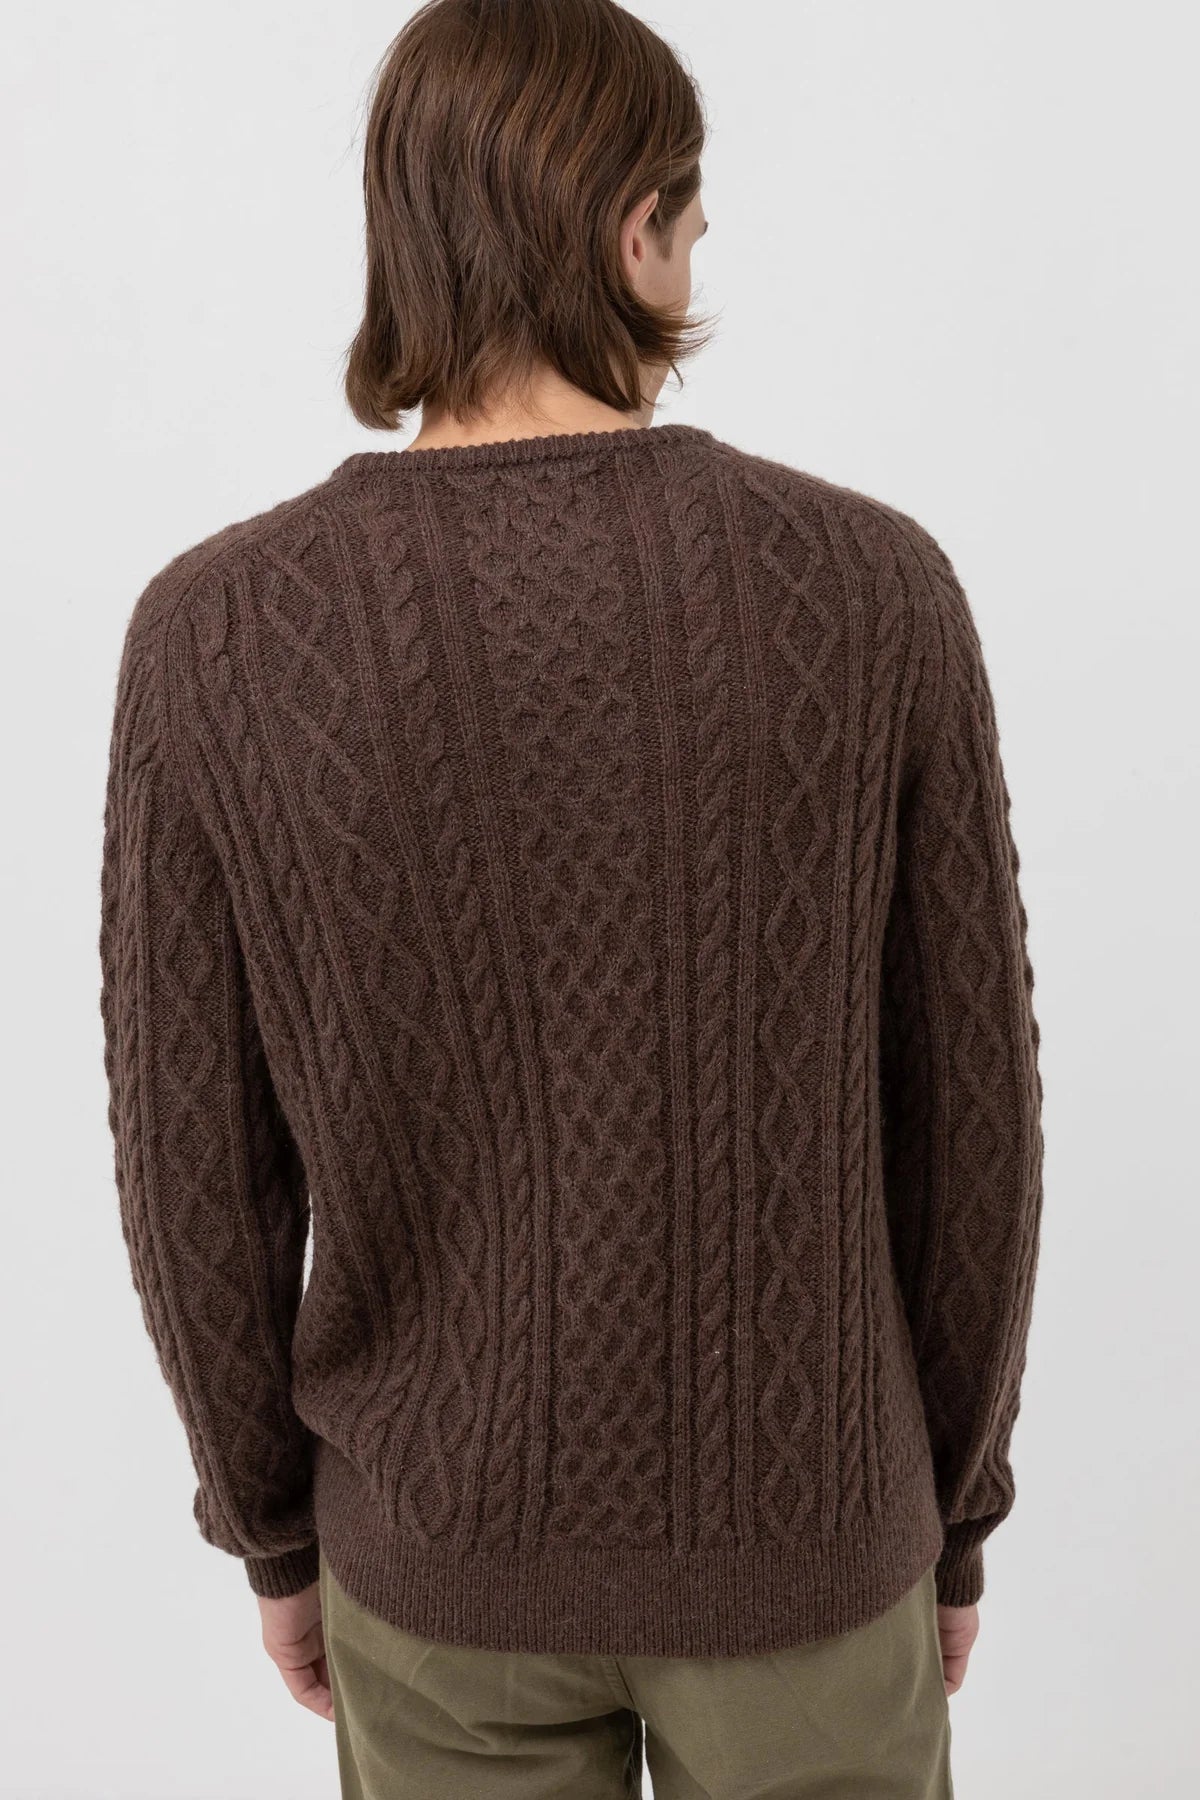 Load image into Gallery viewer, Rhythm Mohair Fishermans Knit - Brown
